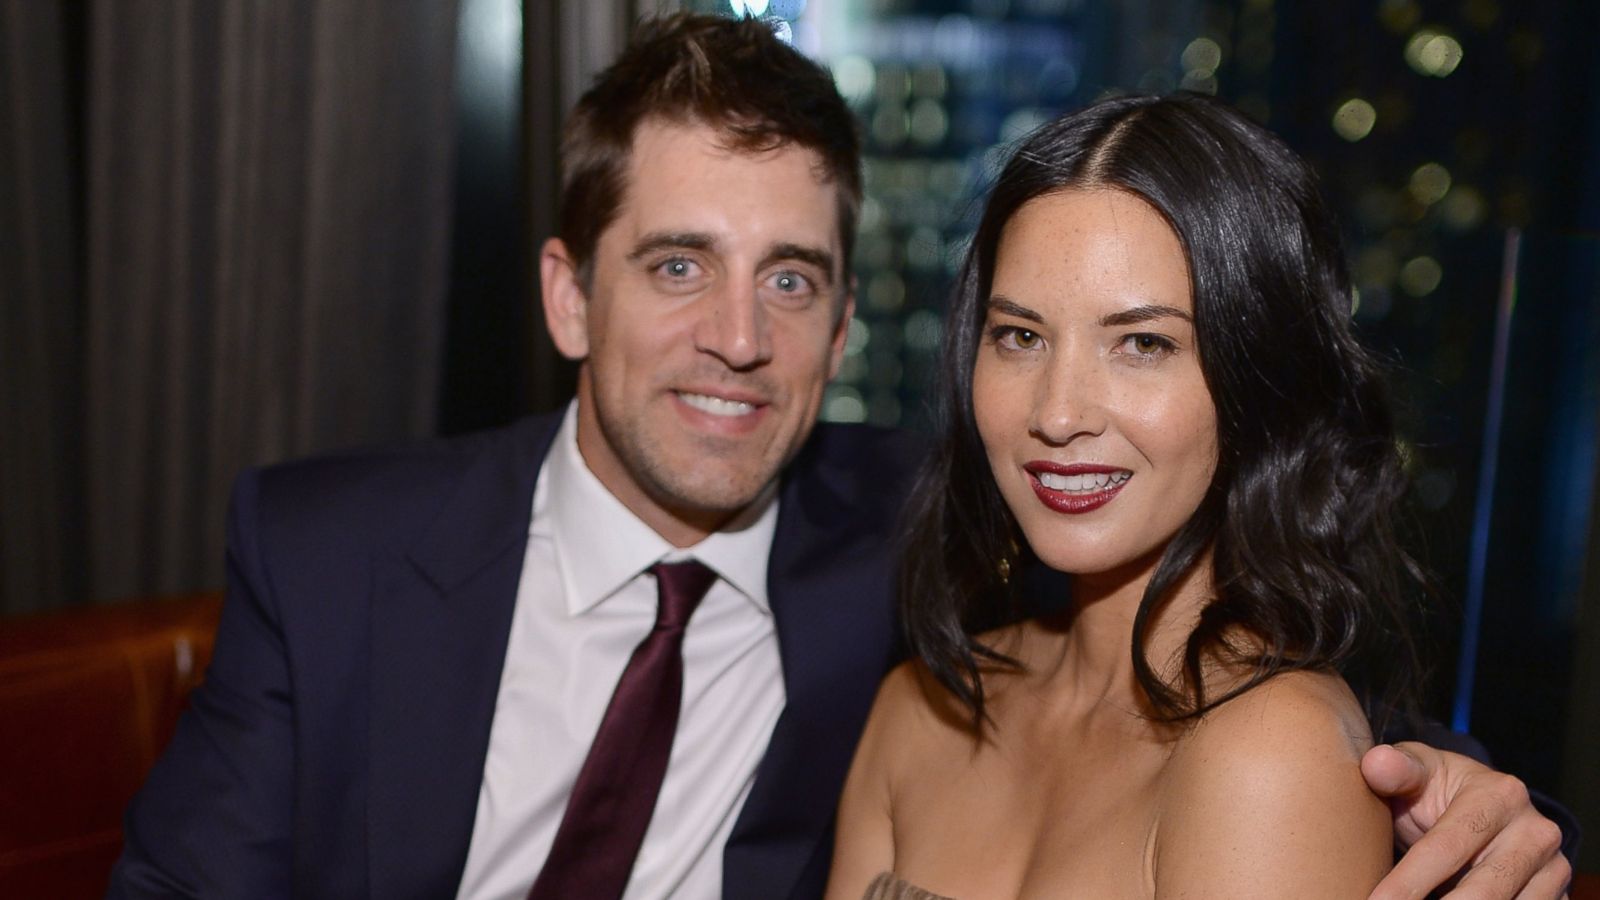 Inside Aaron Rodgers And Olivia Munn S Low Key Romance Abc News Who is aaron rodgers girlfriend? inside aaron rodgers and olivia munn s